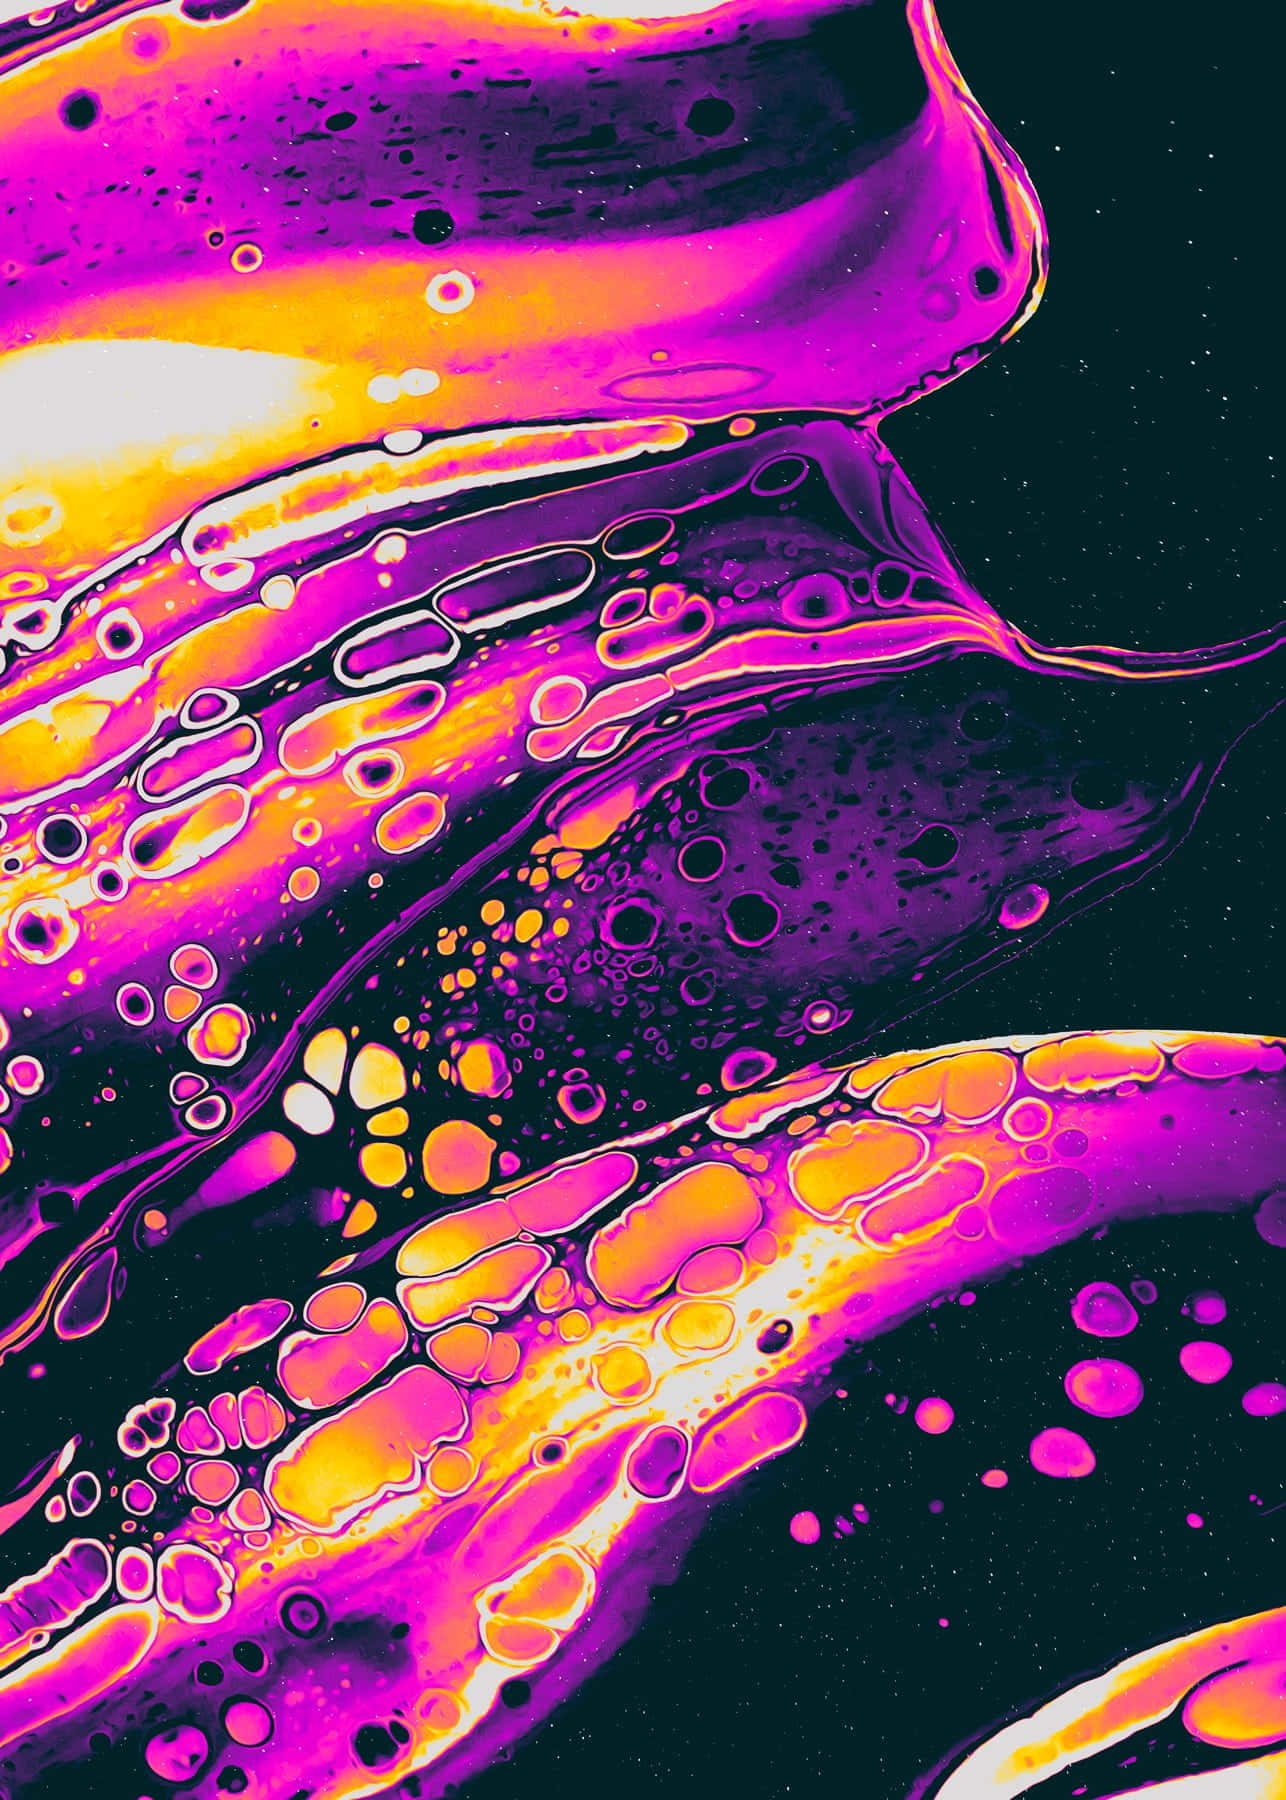 Dazzling Trippy Art with Vibrant Colors Wallpaper